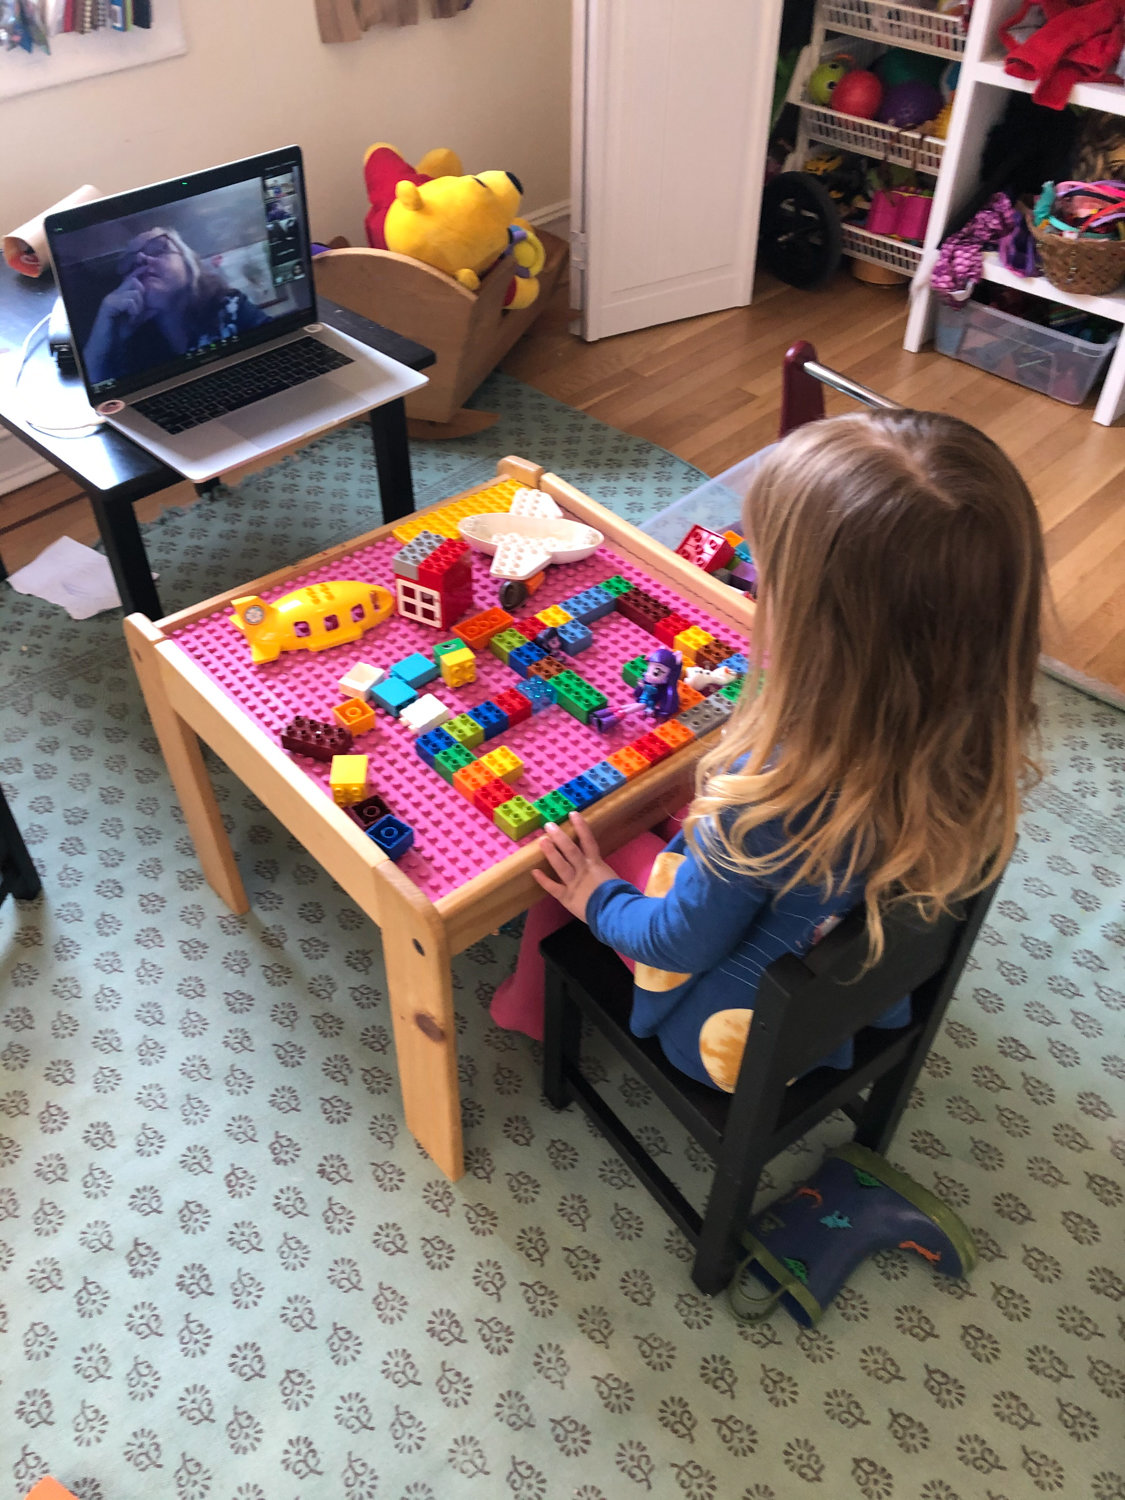 Riverdale Presbyterian Church Nursery School student Luna works with blocks during a virtual class over the videoconferencing app Zoom.